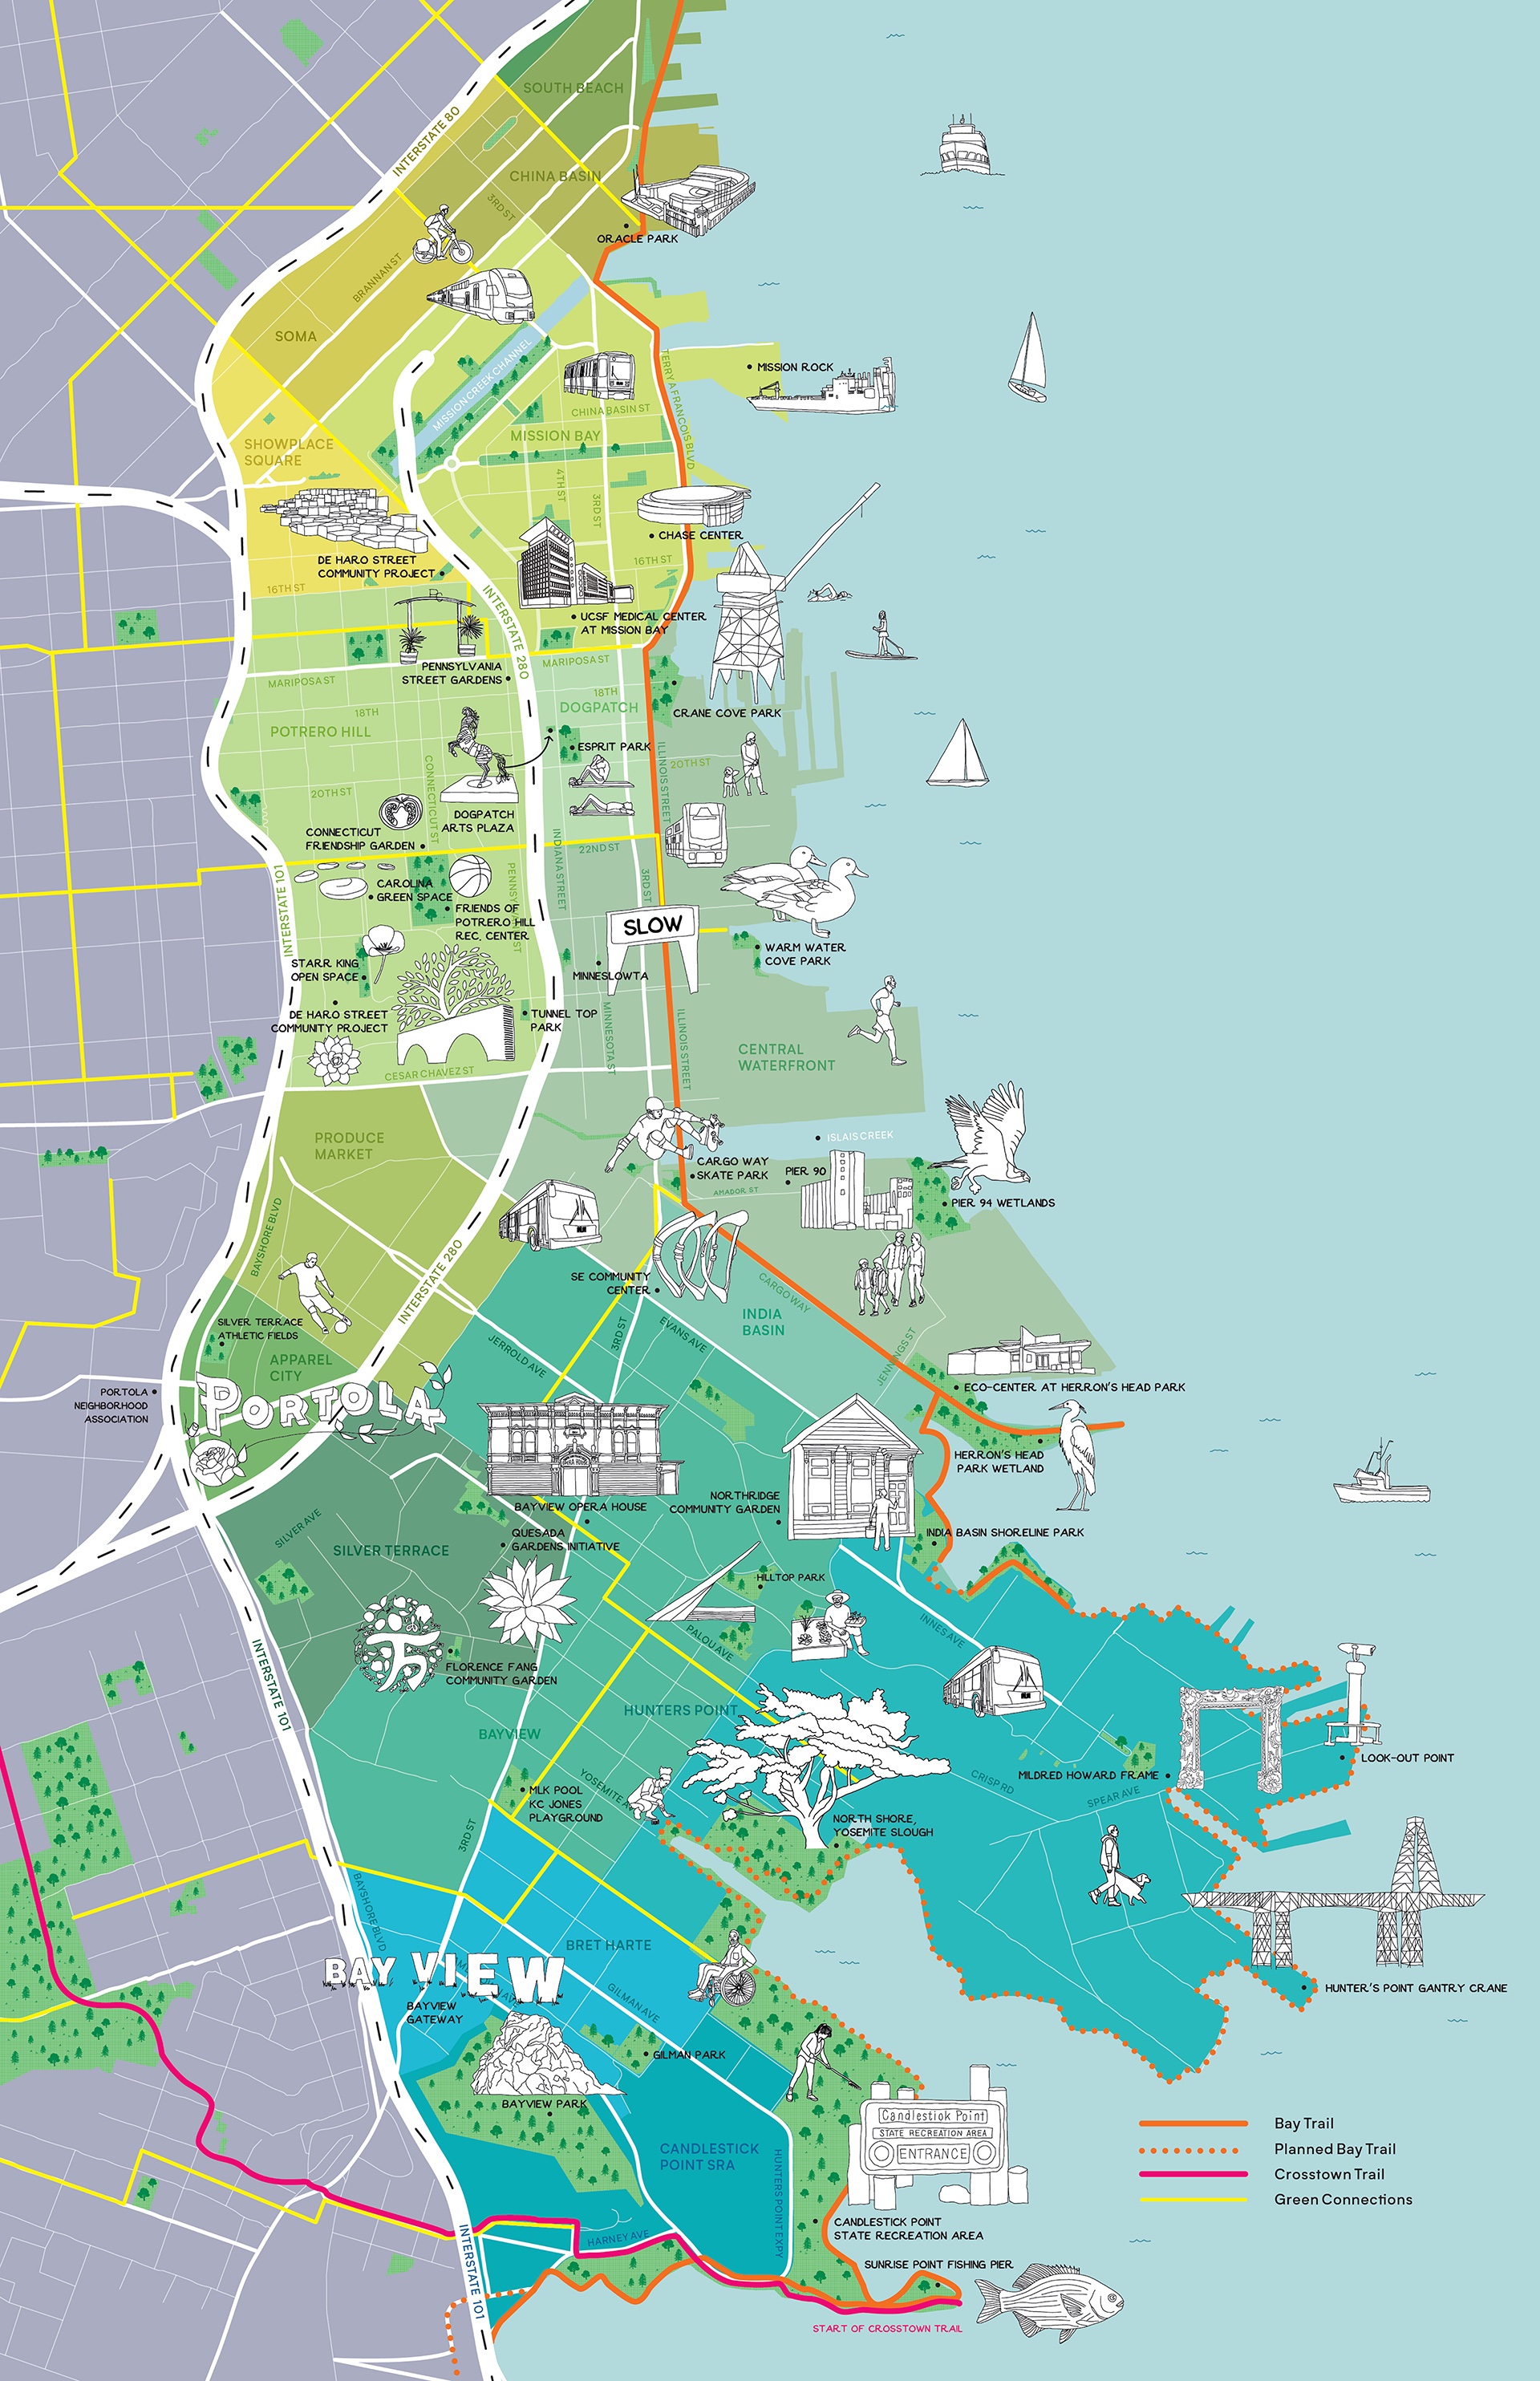 An illustrated map that highlights parks, public spaces, and trails within the Blue Greenway, an area of southeast San Francisco which is bounded on the north by Oracle Park, the south by Candlestick Point, the west by the 101 freeway, and the east by the waterfront.